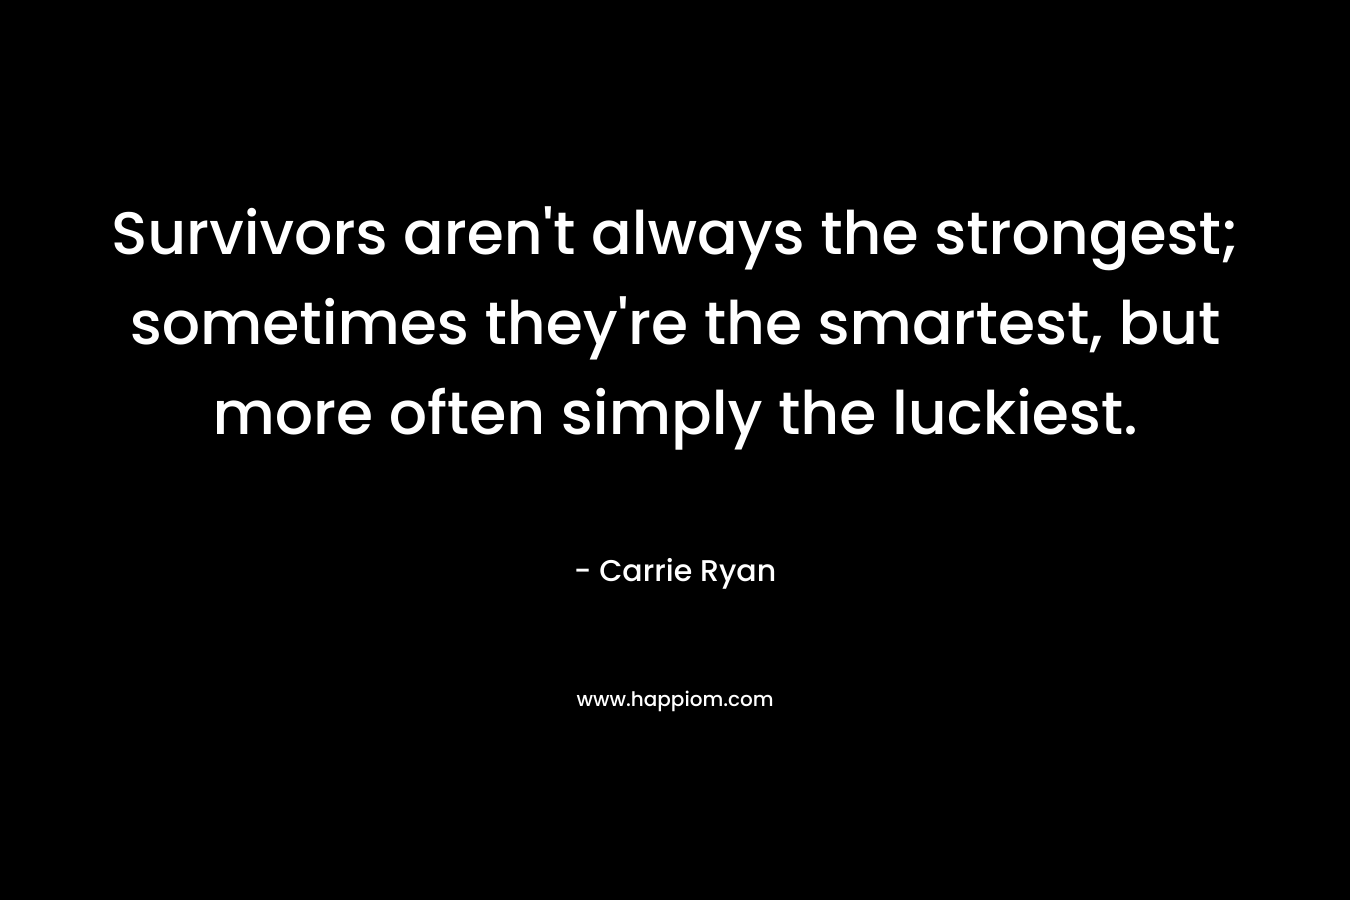 Survivors aren’t always the strongest; sometimes they’re the smartest, but more often simply the luckiest. – Carrie Ryan